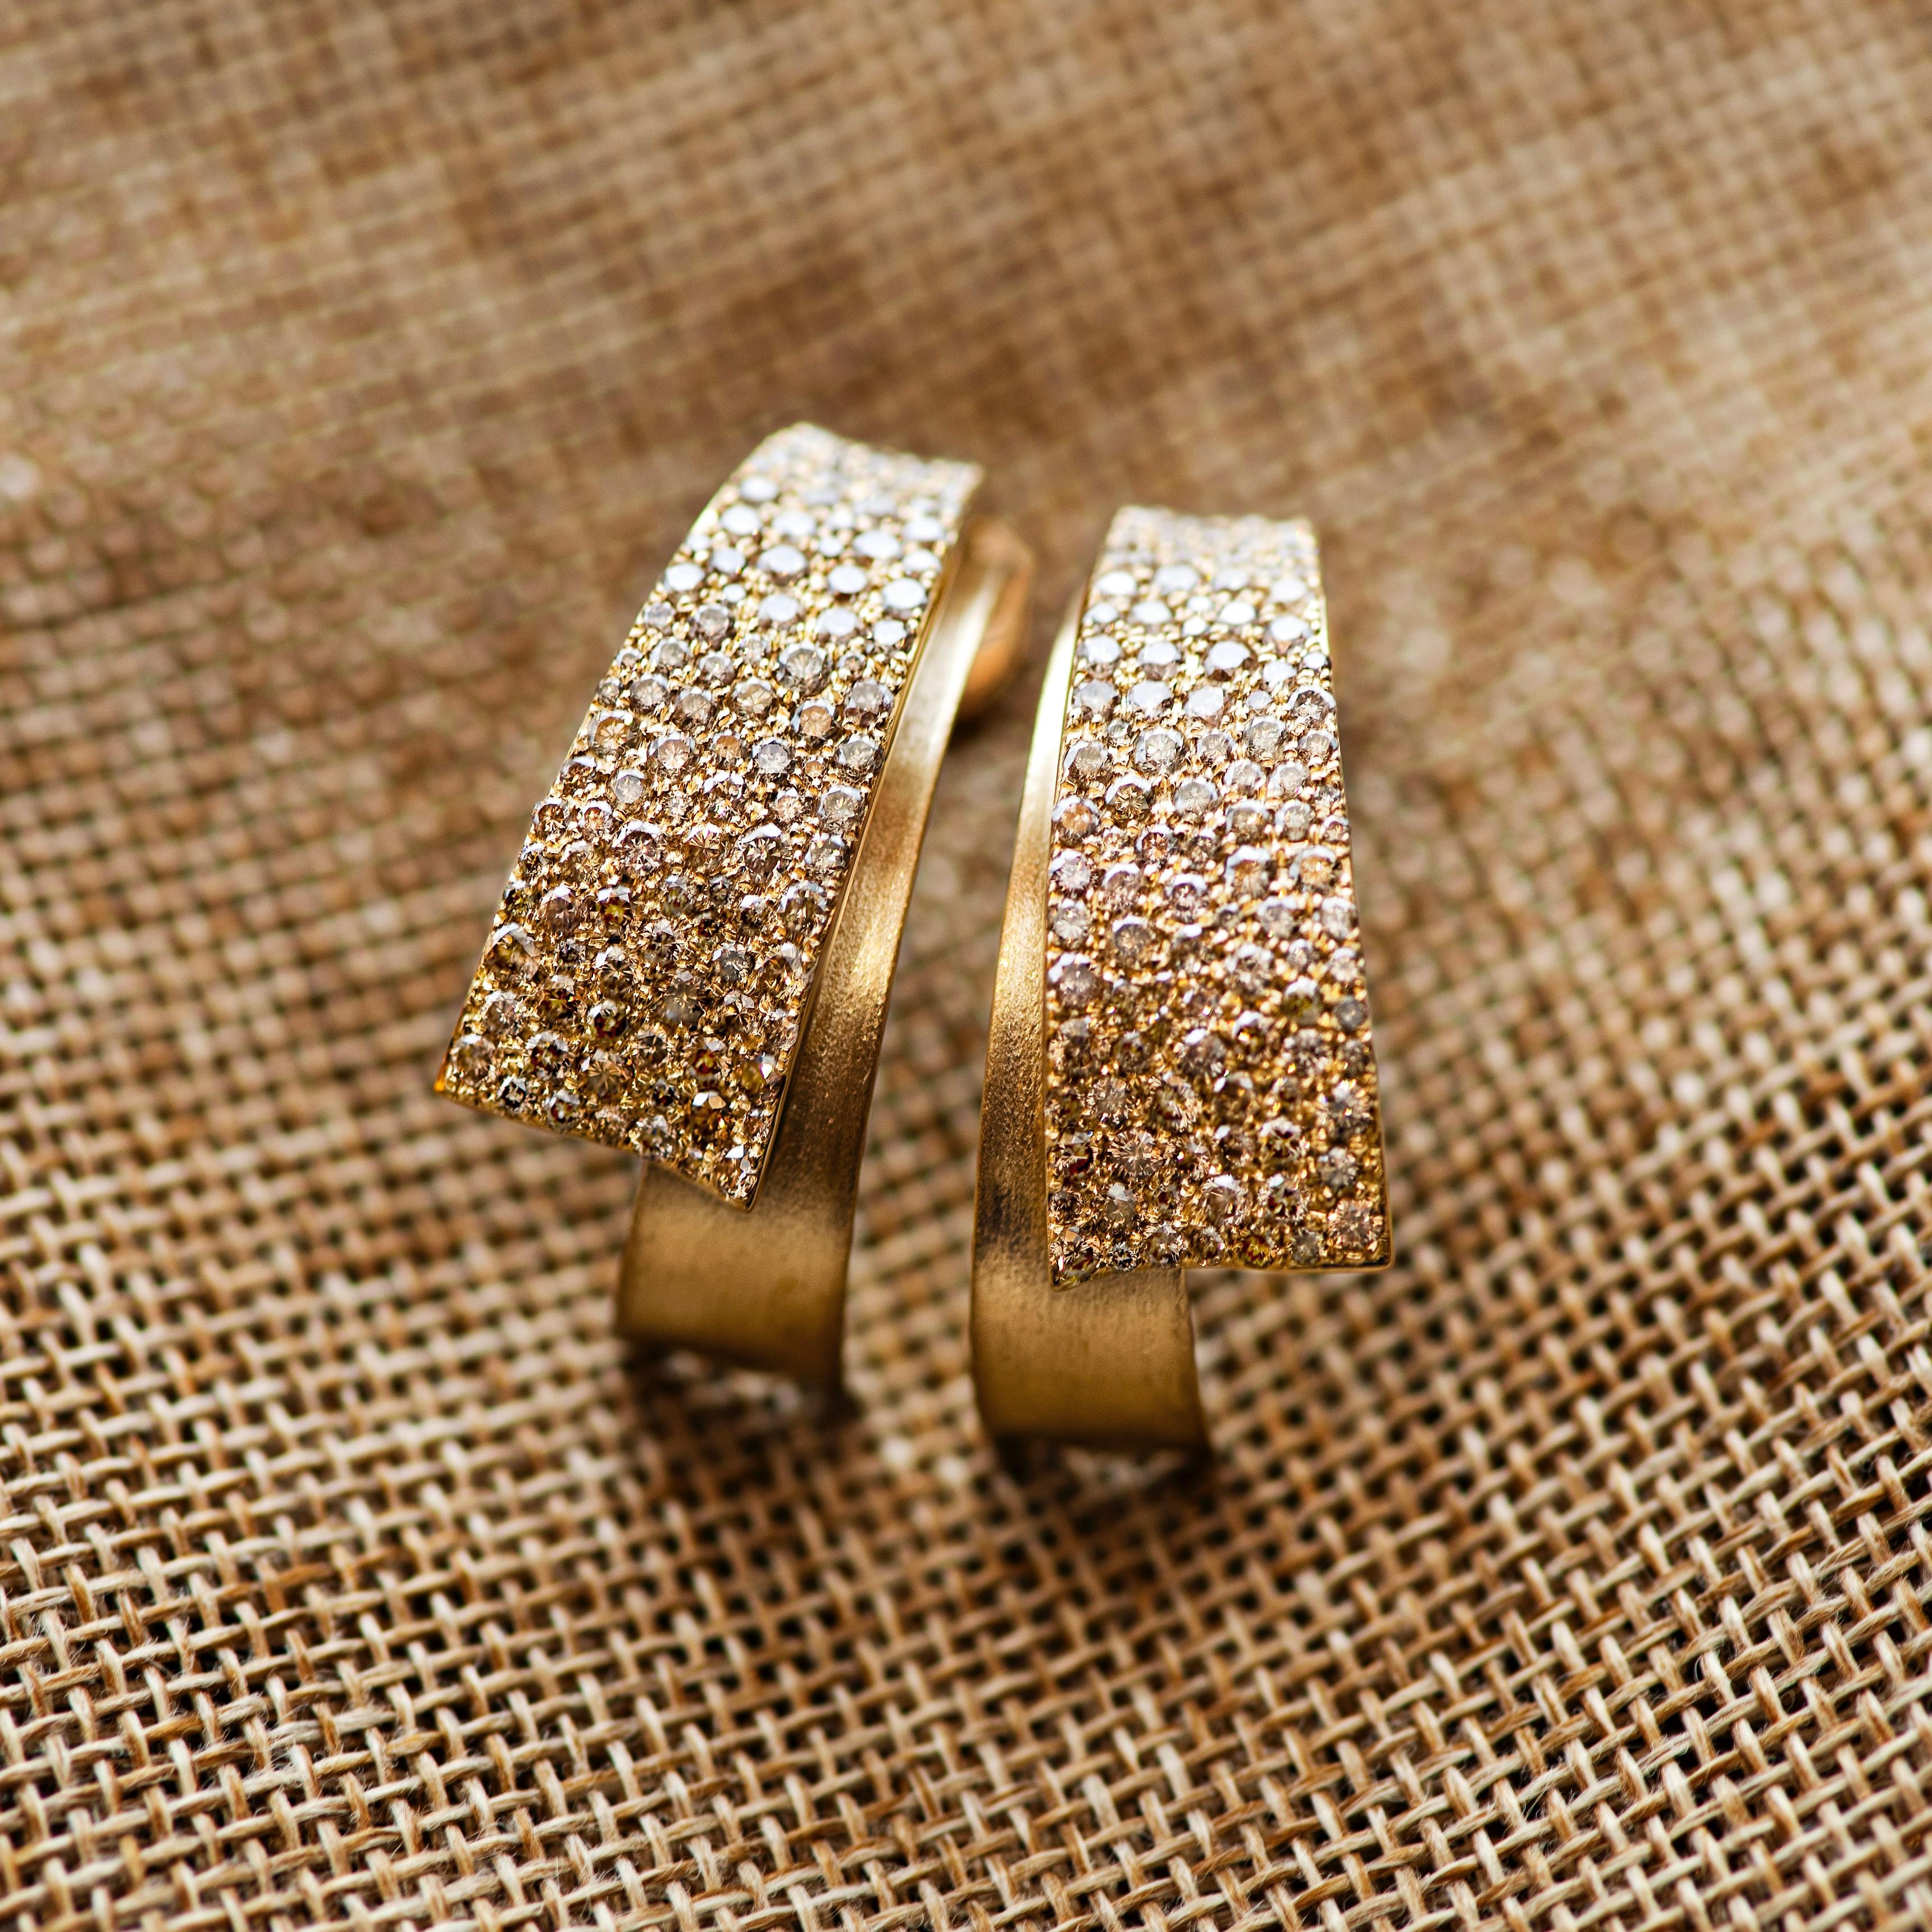 Glow collection by D&A - a fine jewelry collection that shows mix of diamonds in micro pave setting and stylish designs. 
These earrings are really something special - small white and champagne diamonds make it very bright and sparkling. It is very